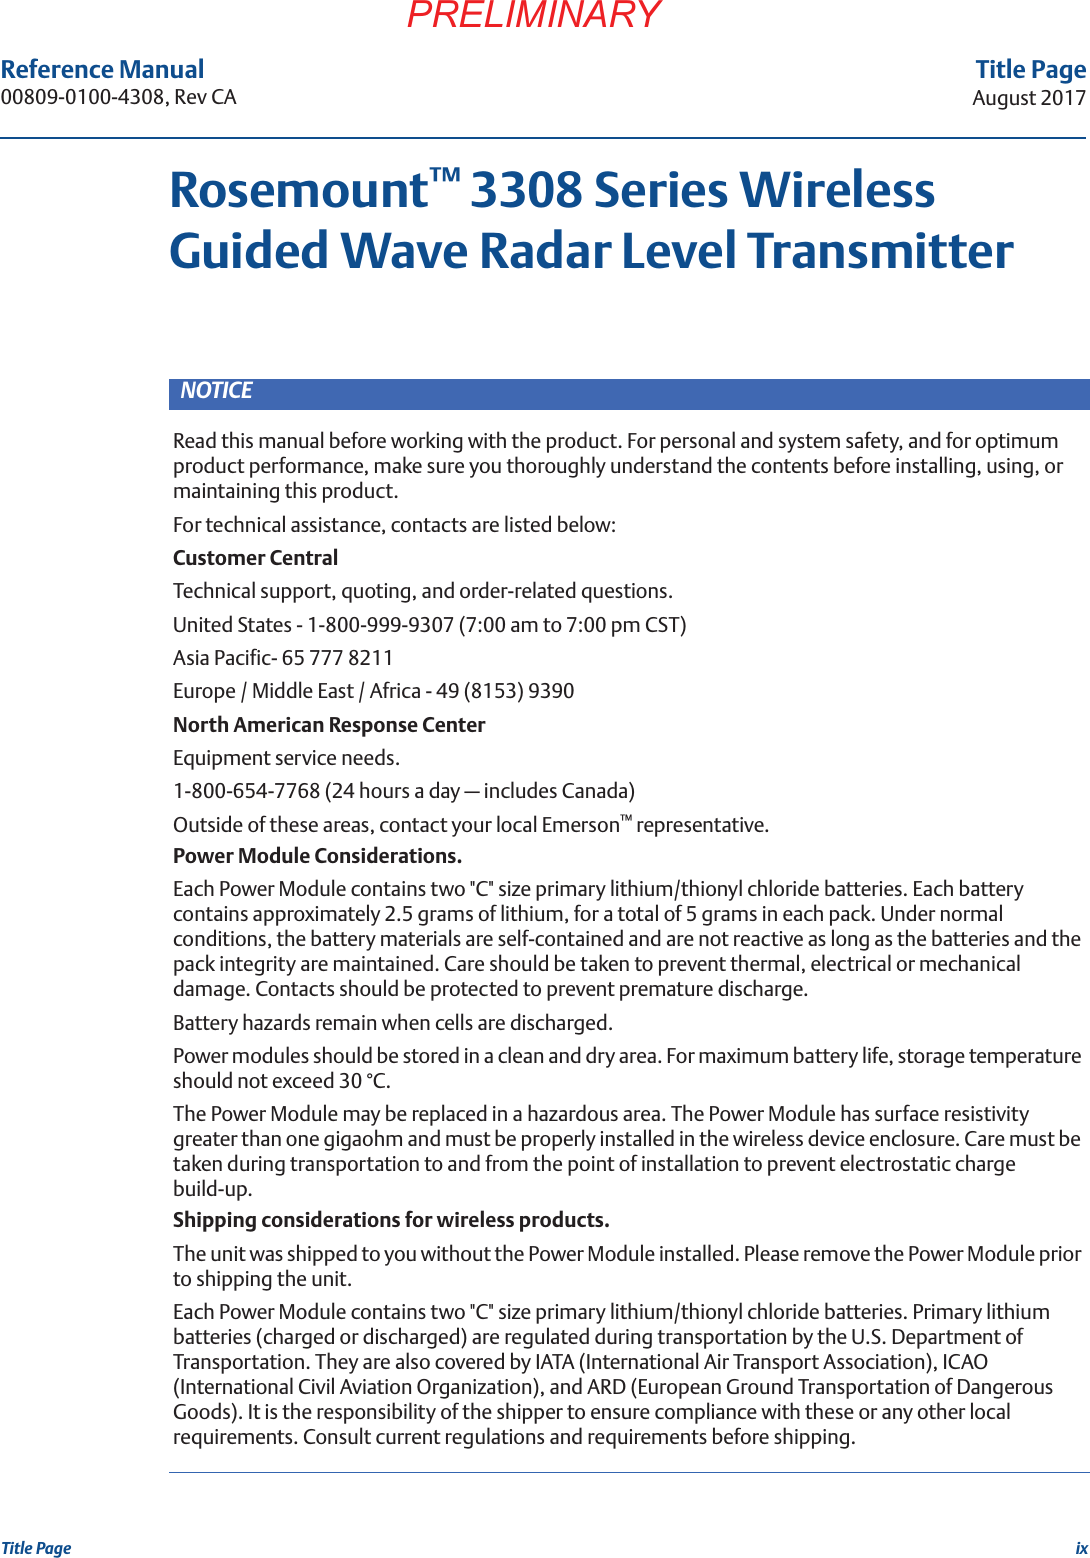 ixTitle PageAugust 2017Title PagePRELIMINARYReference Manual 00809-0100-4308, Rev CARosemount™ 3308 Series Wireless Guided Wave Radar Level TransmitterNOTICERead this manual before working with the product. For personal and system safety, and for optimum product performance, make sure you thoroughly understand the contents before installing, using, or maintaining this product.For technical assistance, contacts are listed below:Customer CentralTechnical support, quoting, and order-related questions.United States - 1-800-999-9307 (7:00 am to 7:00 pm CST)Asia Pacific- 65 777 8211Europe / Middle East / Africa - 49 (8153) 9390North American Response CenterEquipment service needs.1-800-654-7768 (24 hours a day — includes Canada)Outside of these areas, contact your local Emerson™ representative.Power Module Considerations.Each Power Module contains two &quot;C&quot; size primary lithium/thionyl chloride batteries. Each battery contains approximately 2.5 grams of lithium, for a total of 5 grams in each pack. Under normal conditions, the battery materials are self-contained and are not reactive as long as the batteries and the pack integrity are maintained. Care should be taken to prevent thermal, electrical or mechanical damage. Contacts should be protected to prevent premature discharge.Battery hazards remain when cells are discharged.Power modules should be stored in a clean and dry area. For maximum battery life, storage temperature should not exceed 30 °C.The Power Module may be replaced in a hazardous area. The Power Module has surface resistivity greater than one gigaohm and must be properly installed in the wireless device enclosure. Care must be taken during transportation to and from the point of installation to prevent electrostatic charge build-up.Shipping considerations for wireless products.The unit was shipped to you without the Power Module installed. Please remove the Power Module prior to shipping the unit.Each Power Module contains two &quot;C&quot; size primary lithium/thionyl chloride batteries. Primary lithium batteries (charged or discharged) are regulated during transportation by the U.S. Department of Transportation. They are also covered by IATA (International Air Transport Association), ICAO (International Civil Aviation Organization), and ARD (European Ground Transportation of Dangerous Goods). It is the responsibility of the shipper to ensure compliance with these or any other local requirements. Consult current regulations and requirements before shipping.